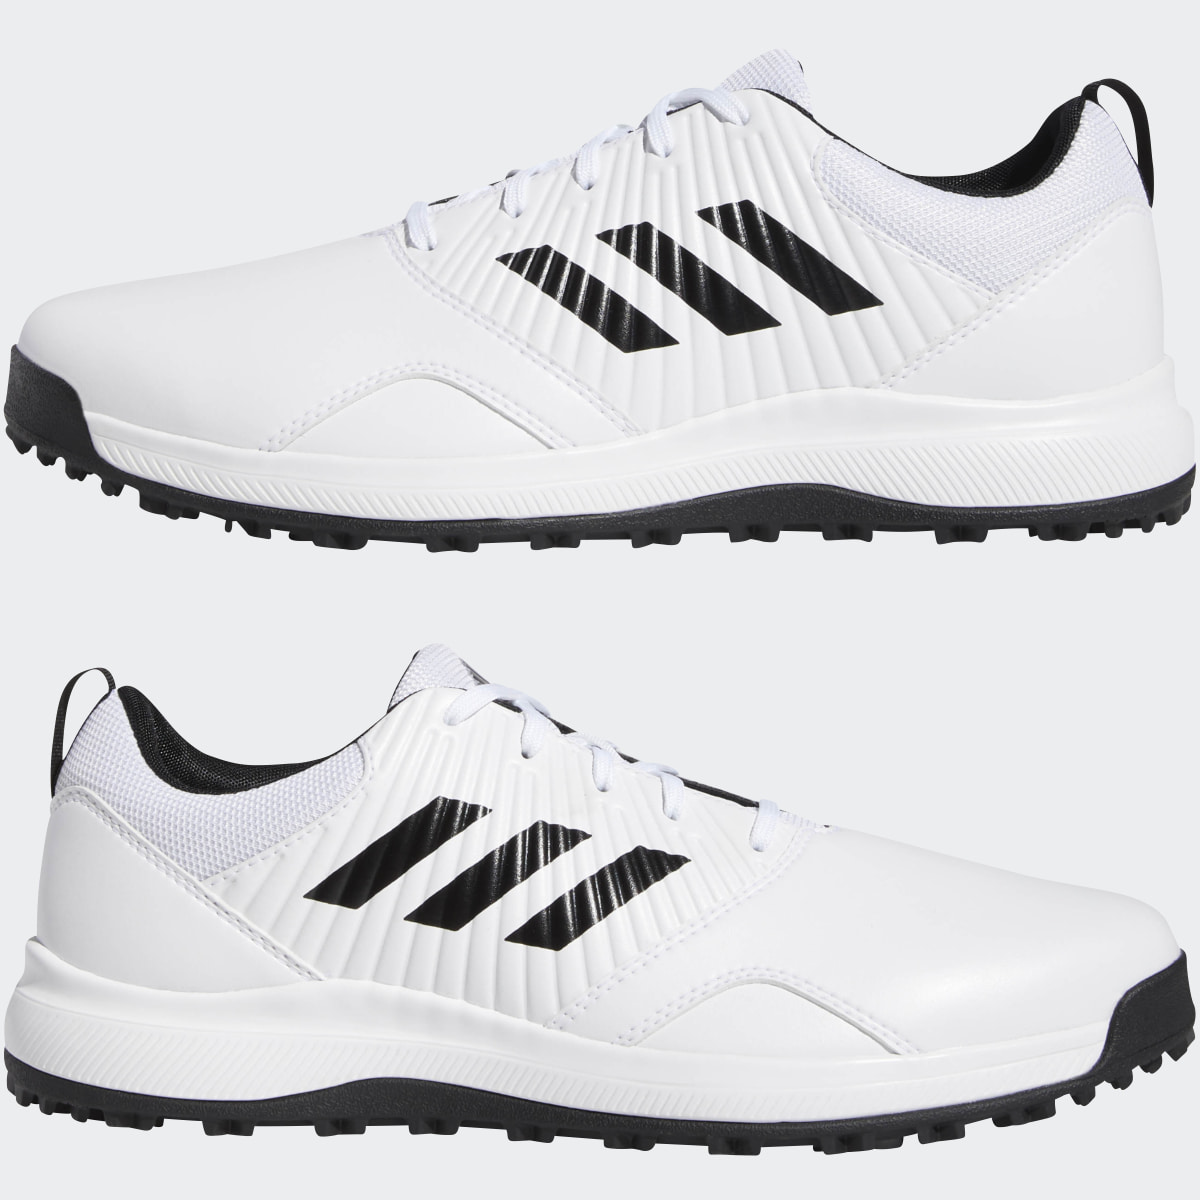 Adidas CP Traxion Spikeless Shoes. 9